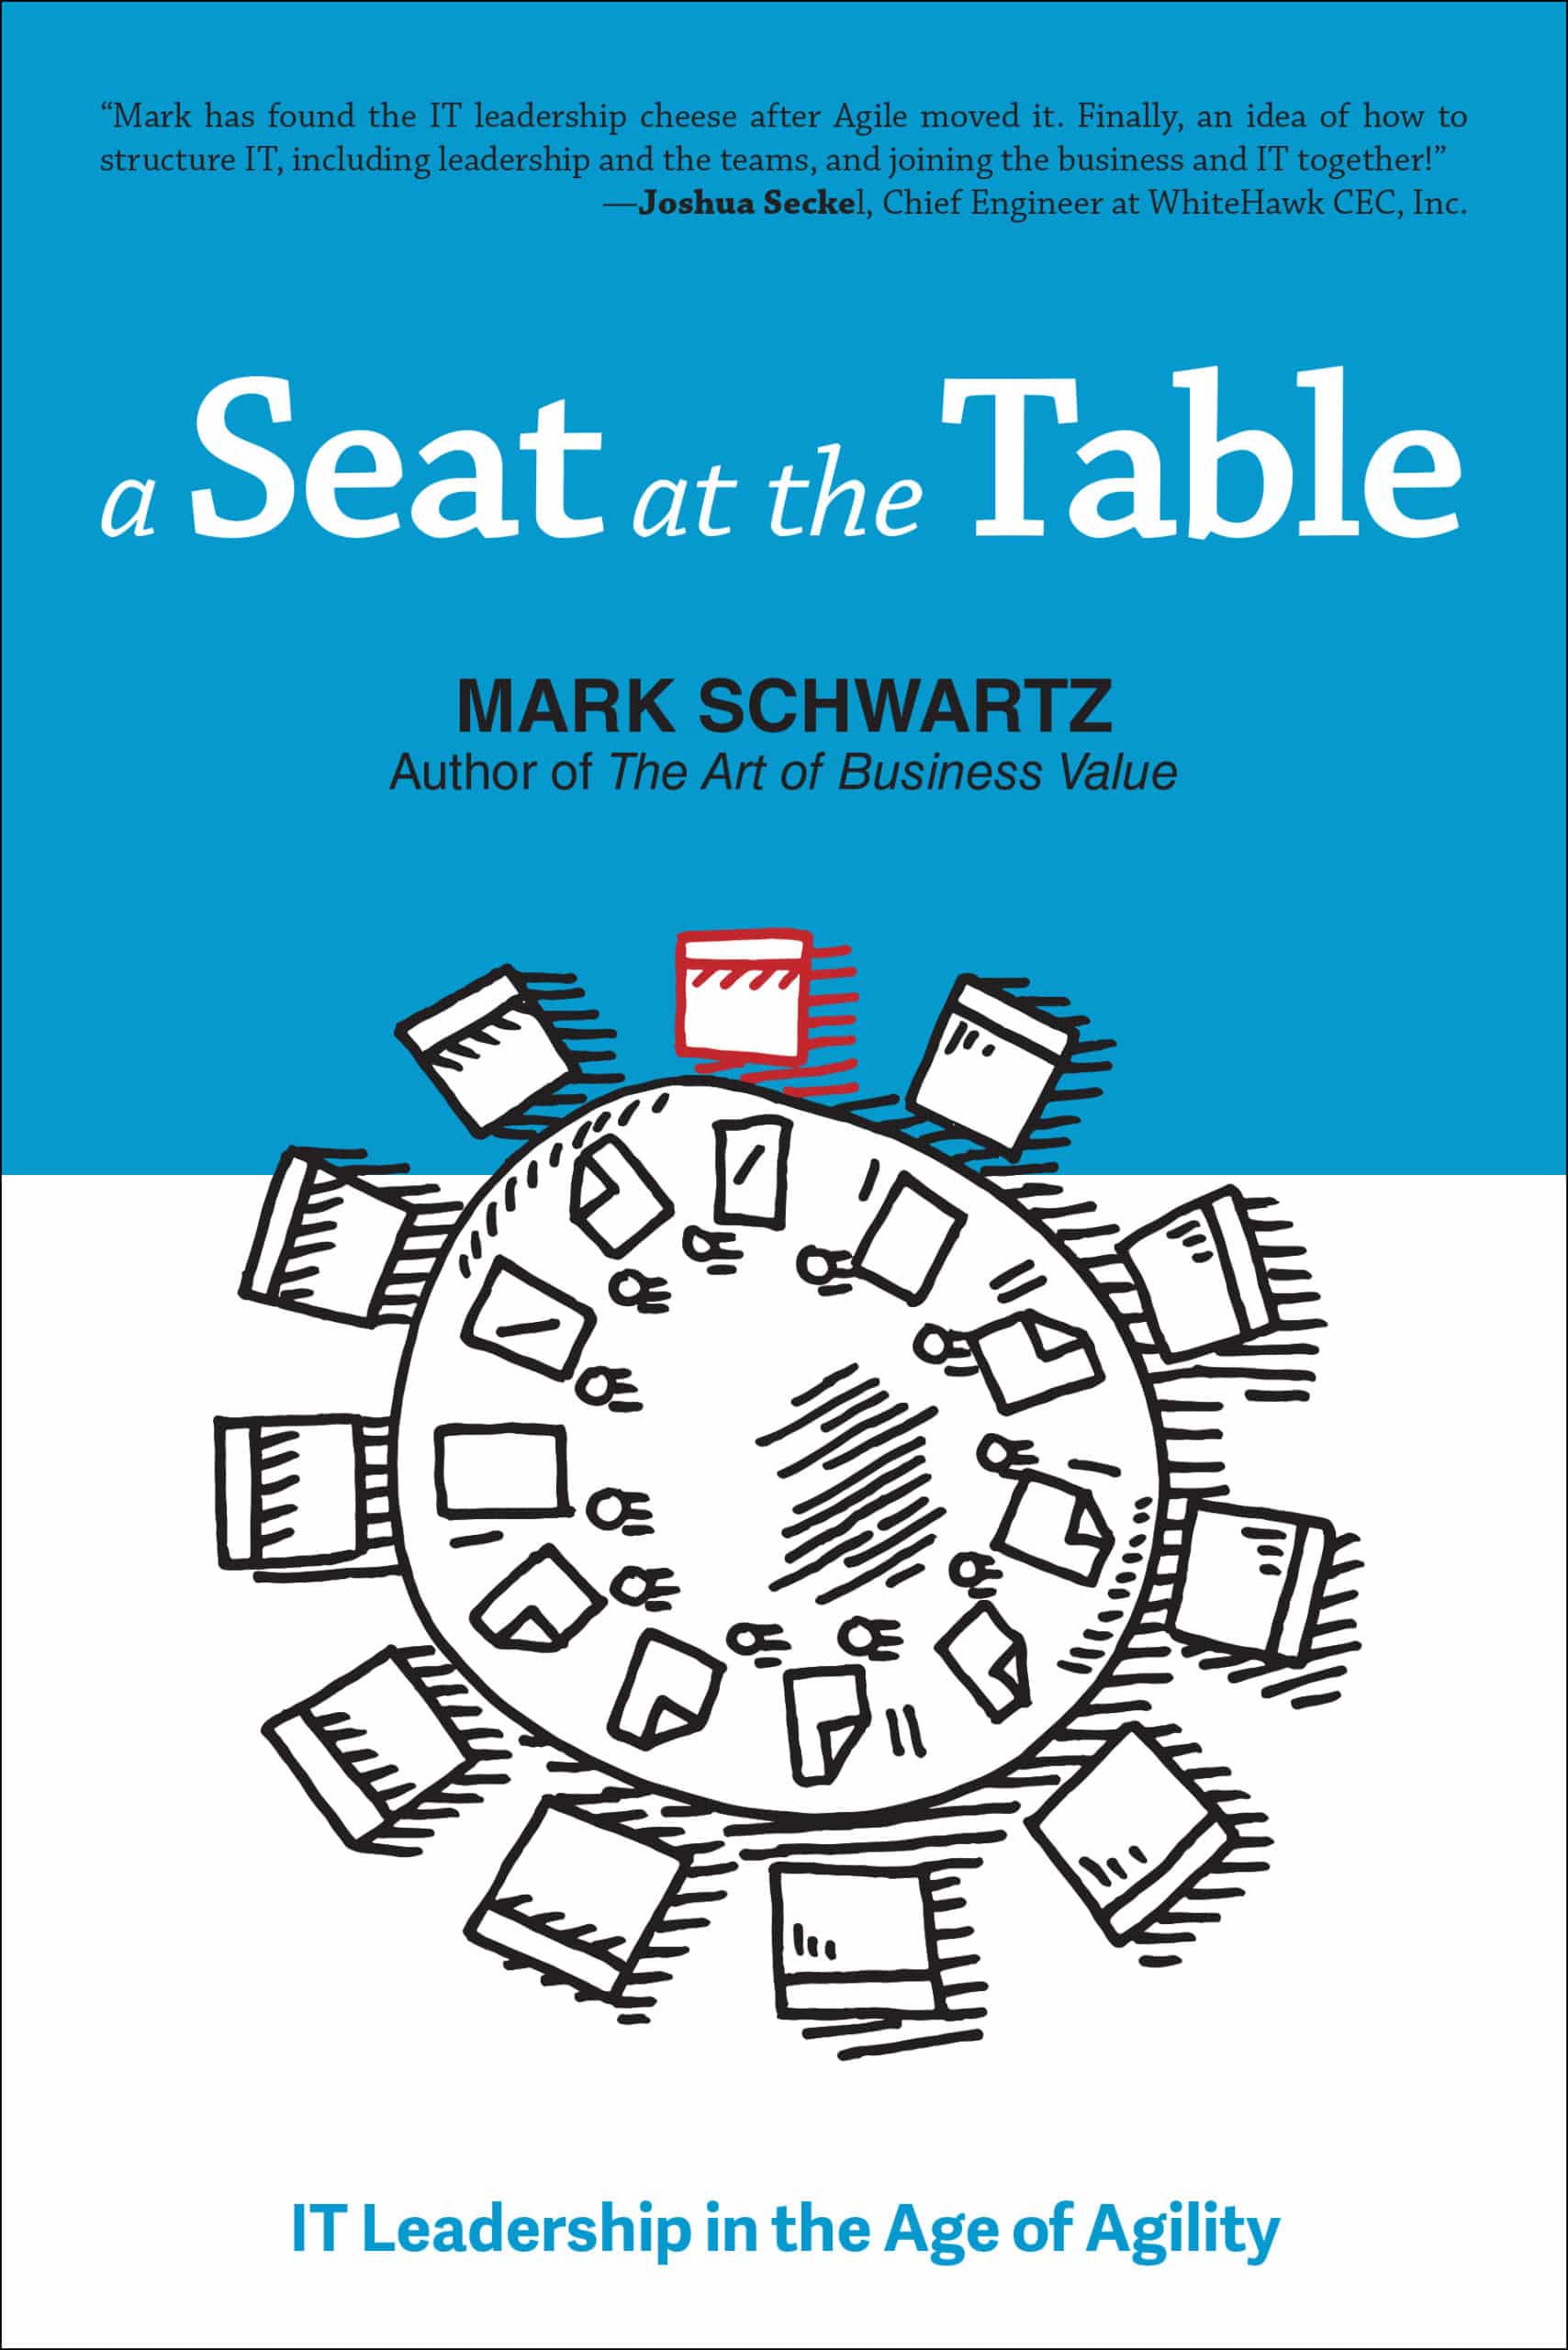 Cover of A Seat at the Table: IT Leadership in the Age of Agility by Mark Schwartz, a guide for IT leaders in an Agile world.